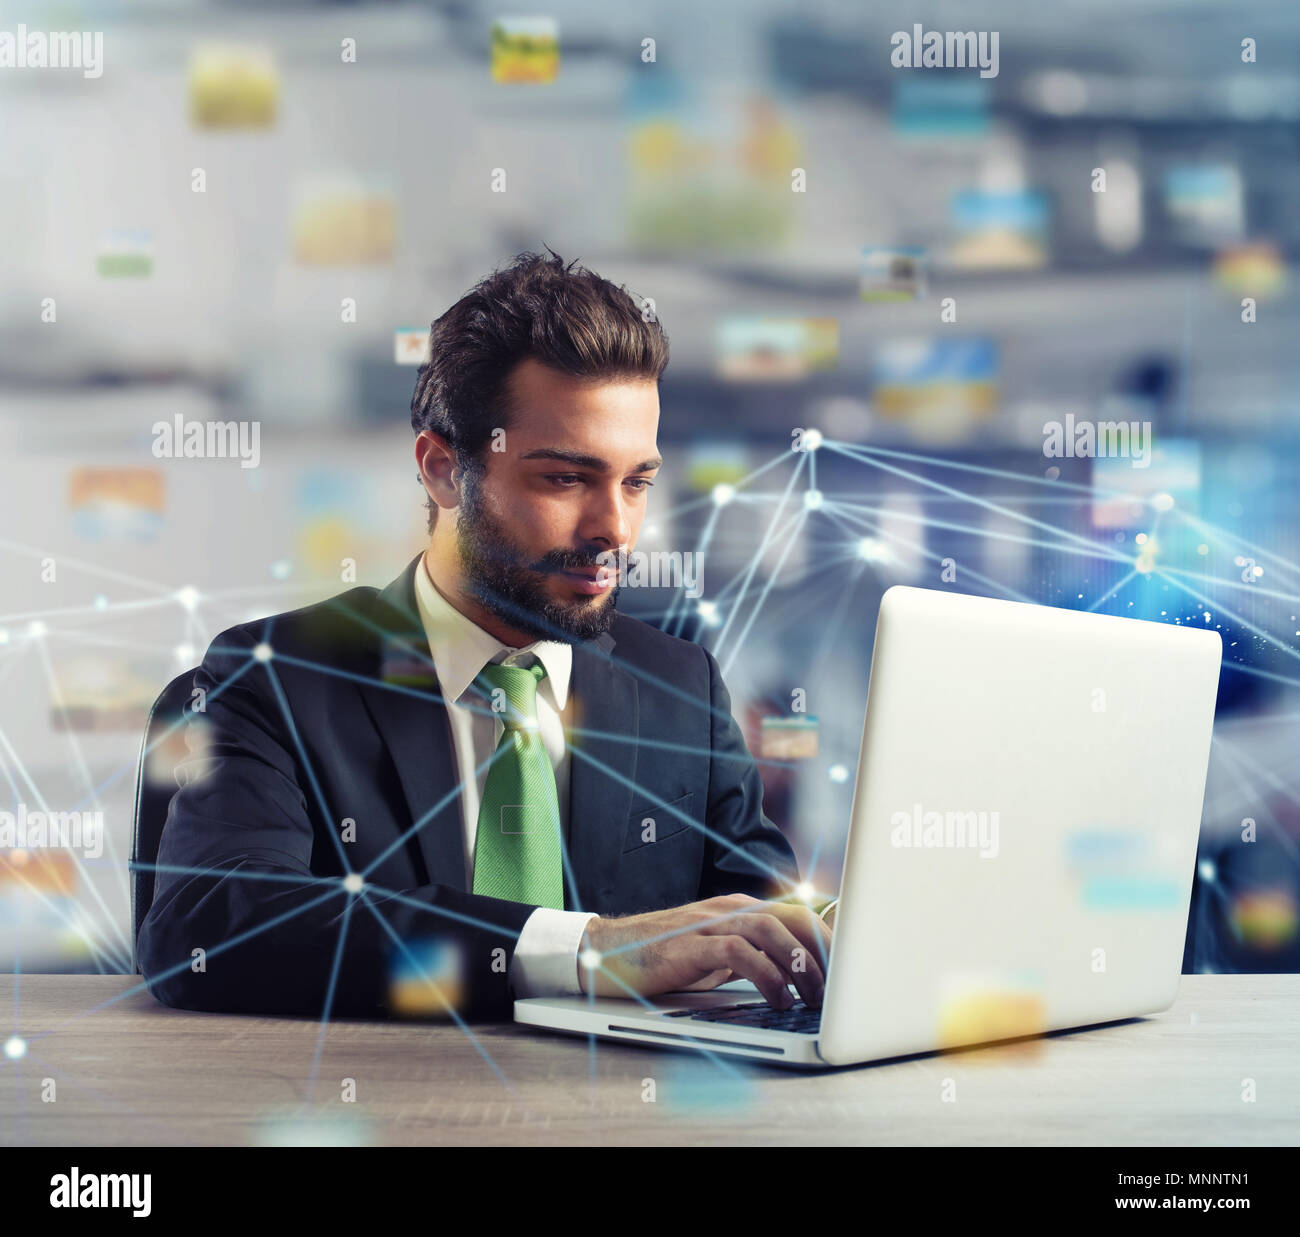 Businessman in office connected on internet network. concept of startup company Stock Photo